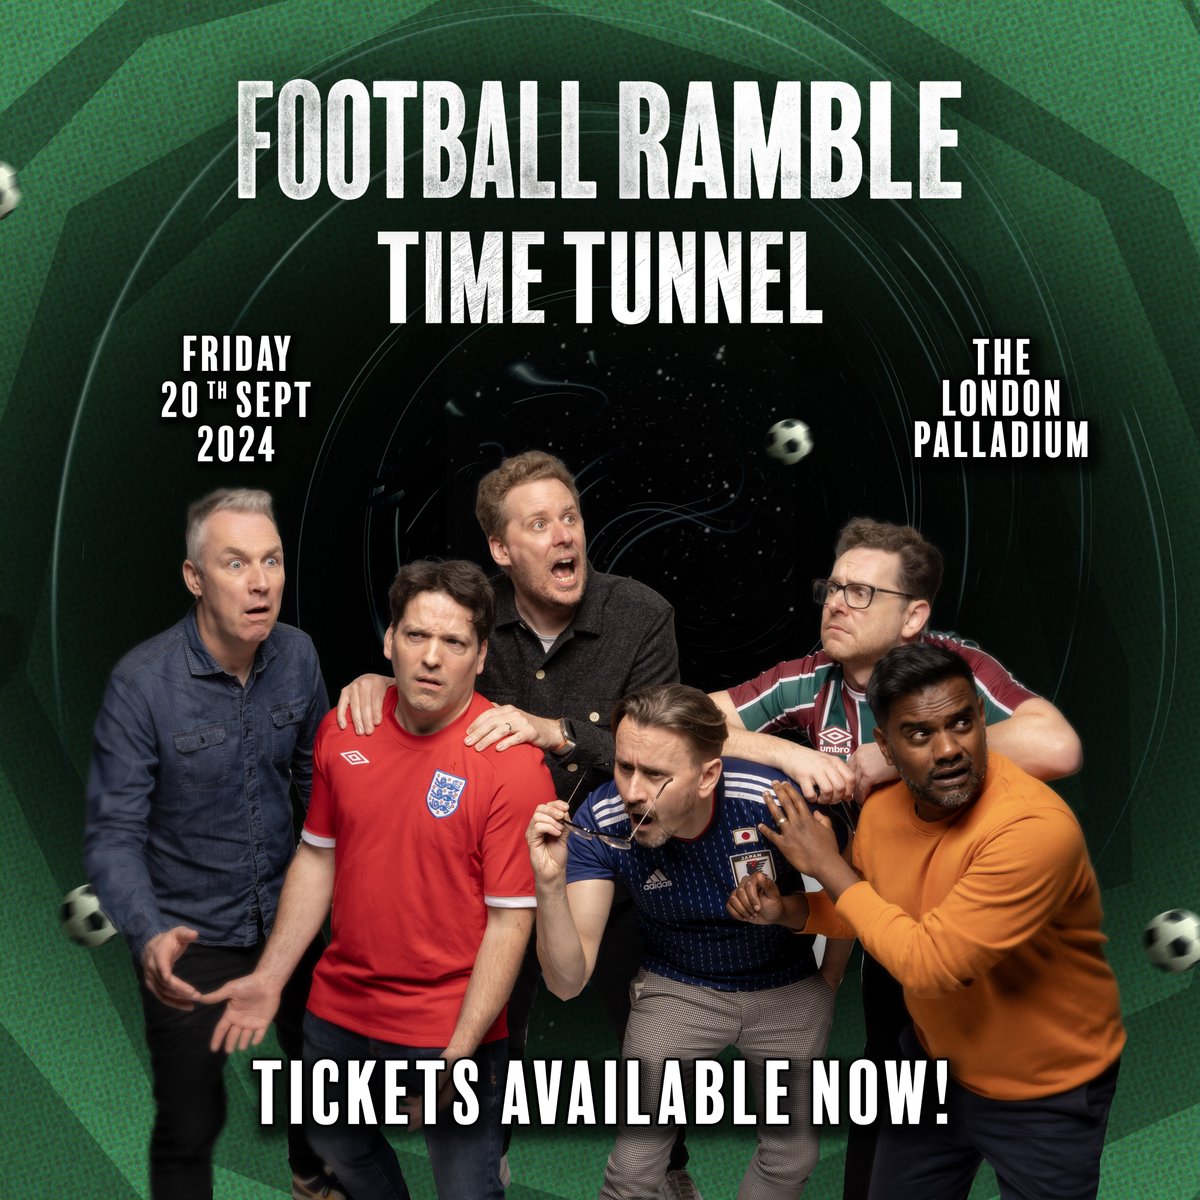 The Football Ramble! Friday night at the Palladium! I've enquired about trapdoors and fire regulations and whether a recursive bow counts as an offensive weapon TICKETS ARE ON GENERAL SALE NOW! footballramblelive.com